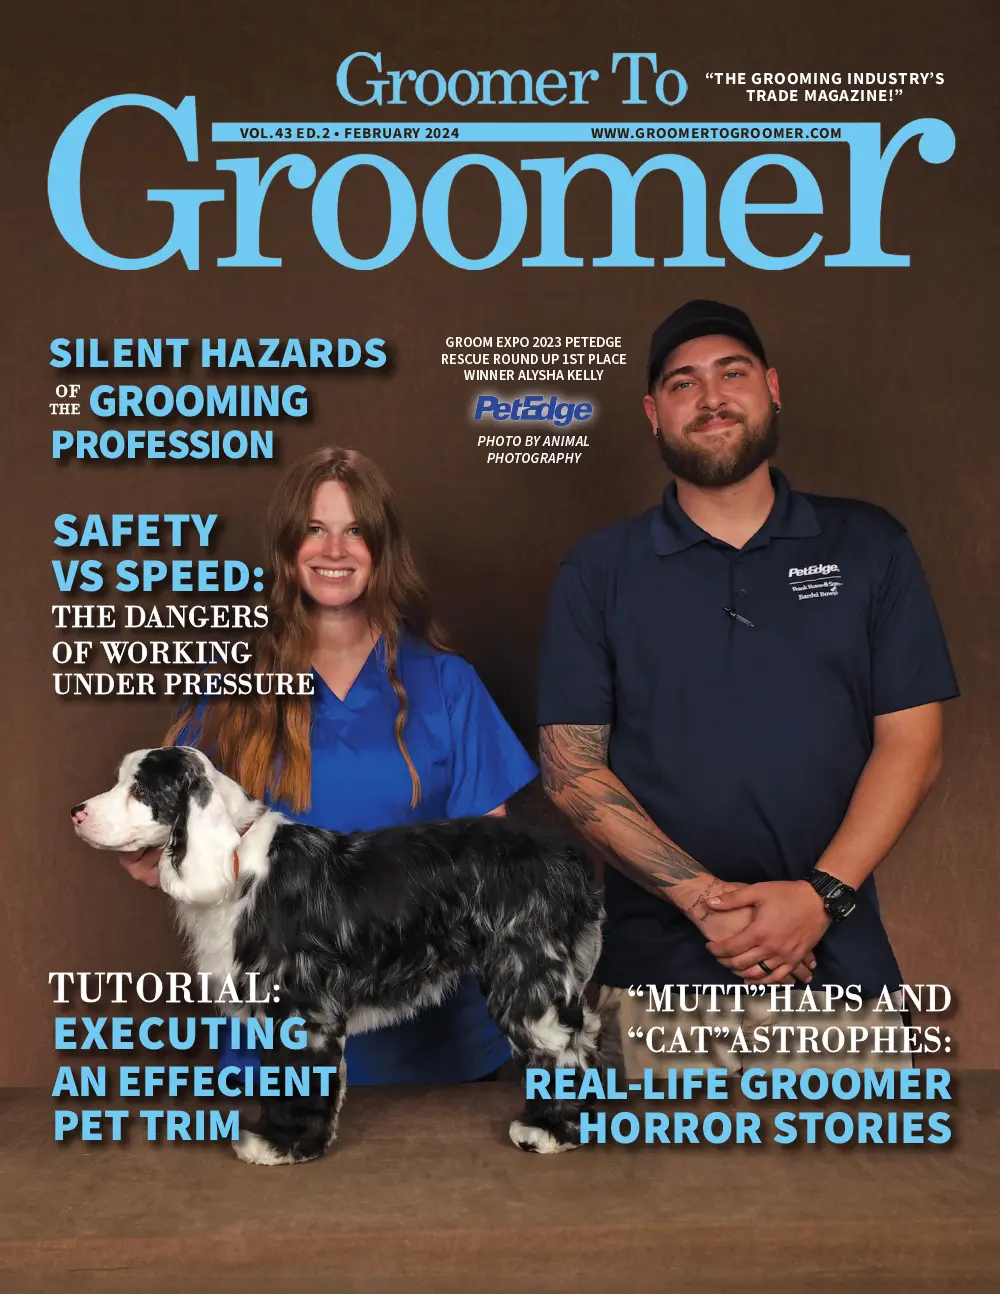 Groomer to Groomer TOC February '24 cover